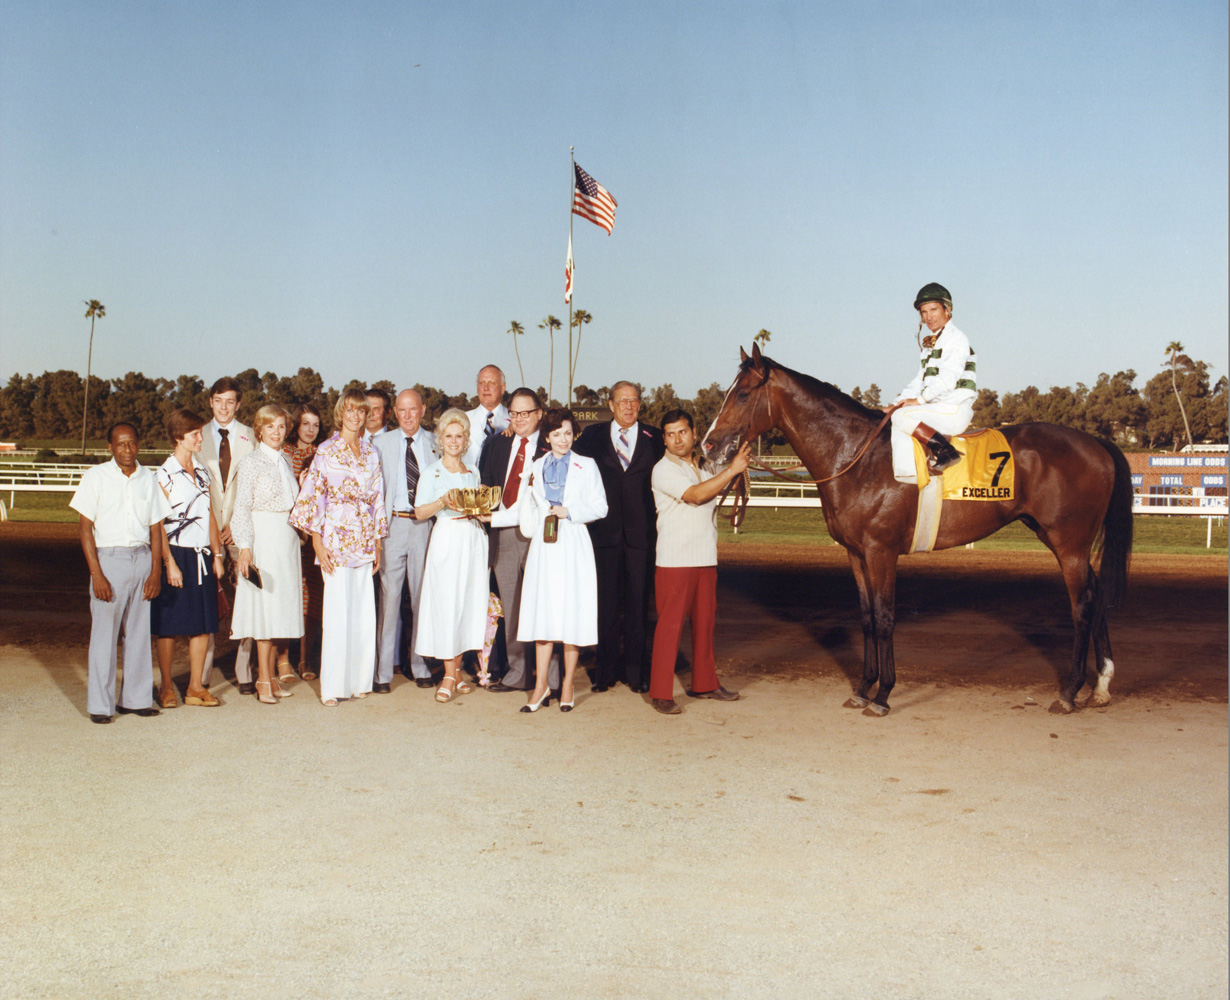 Winner's circle photograph for the 1978 Hollywood Invitational at Hollywood Park, won by Exceller (Bill Shoemaker up), trained by Charlie Whittingham (Hollywood Park Photo/Museum Collection)